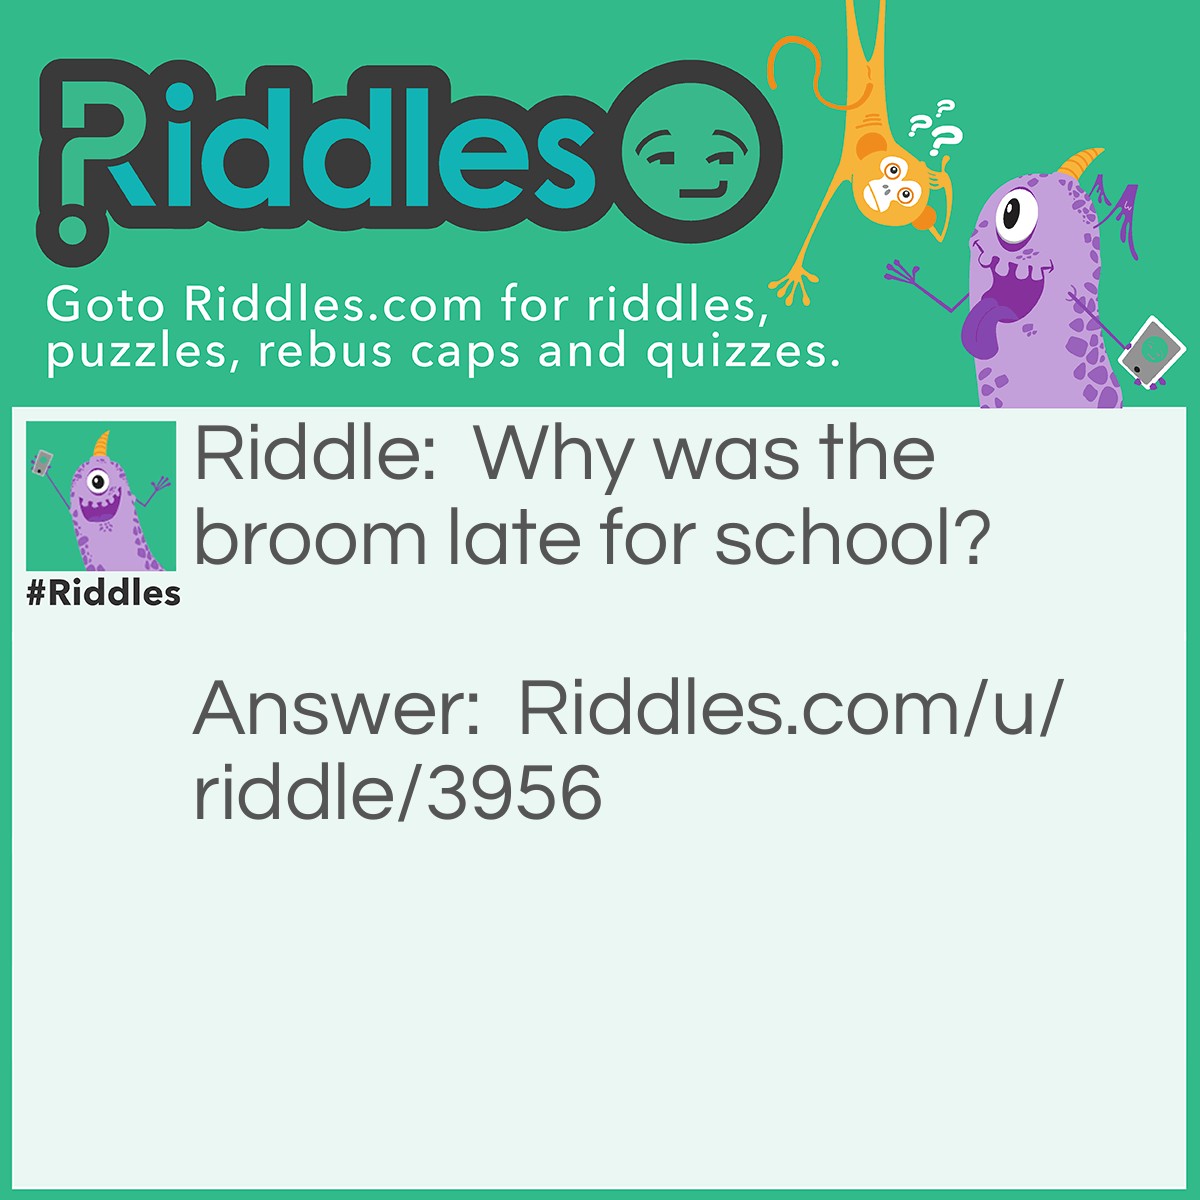 Riddle: Why was the broom late for school? Answer: He overswept.